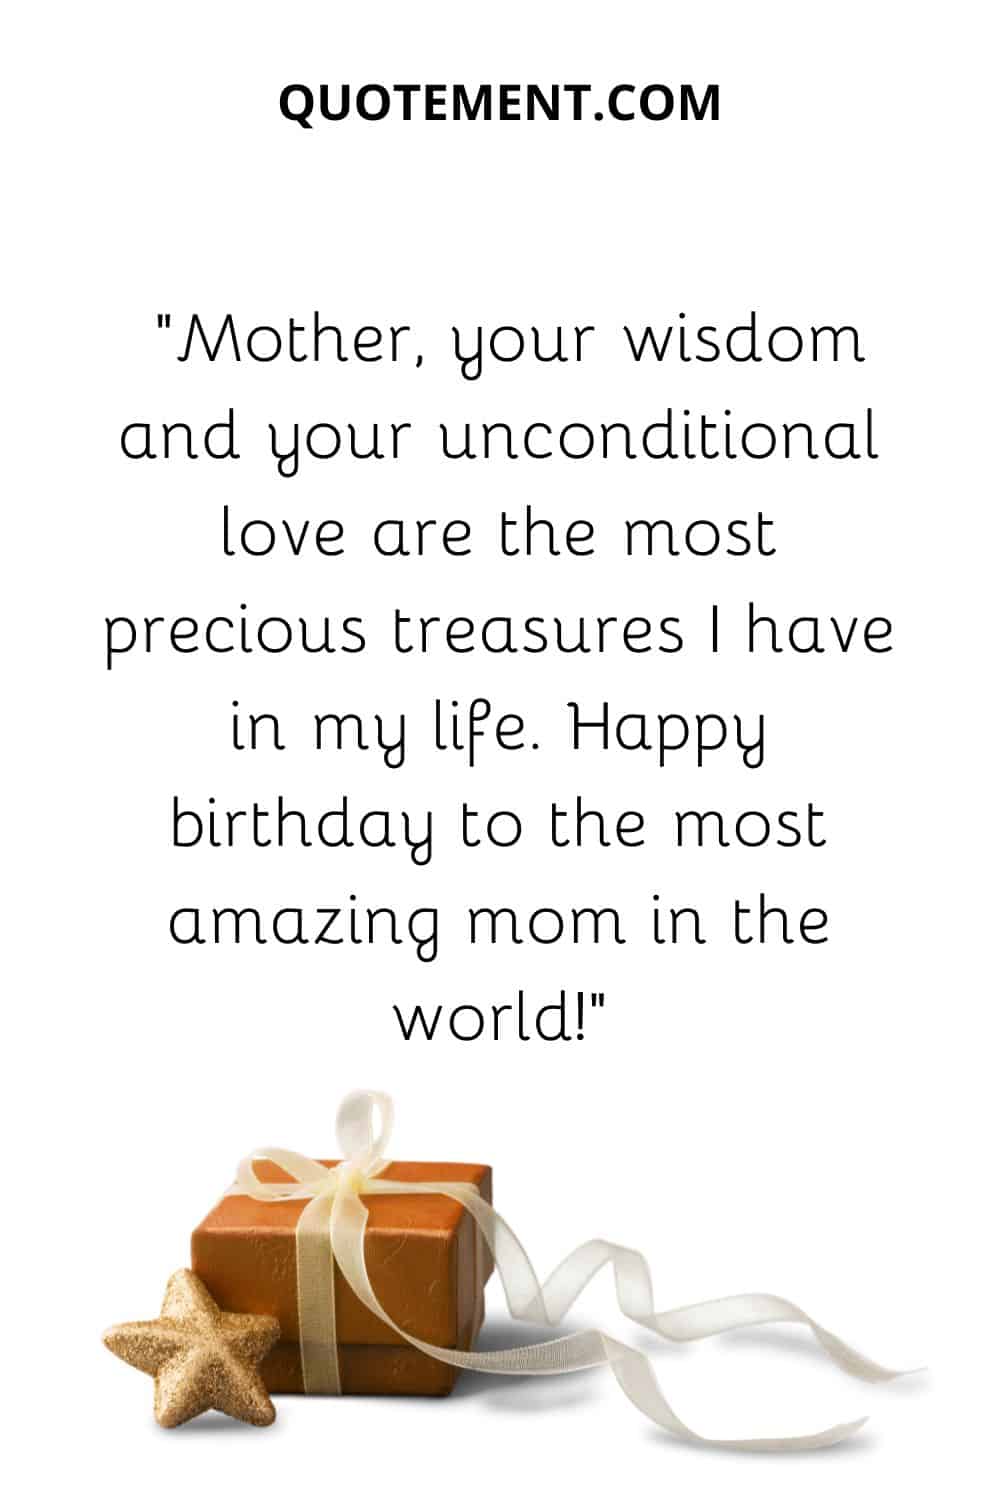 Mother, your wisdom and your unconditional love are the most precious treasures I have in my life